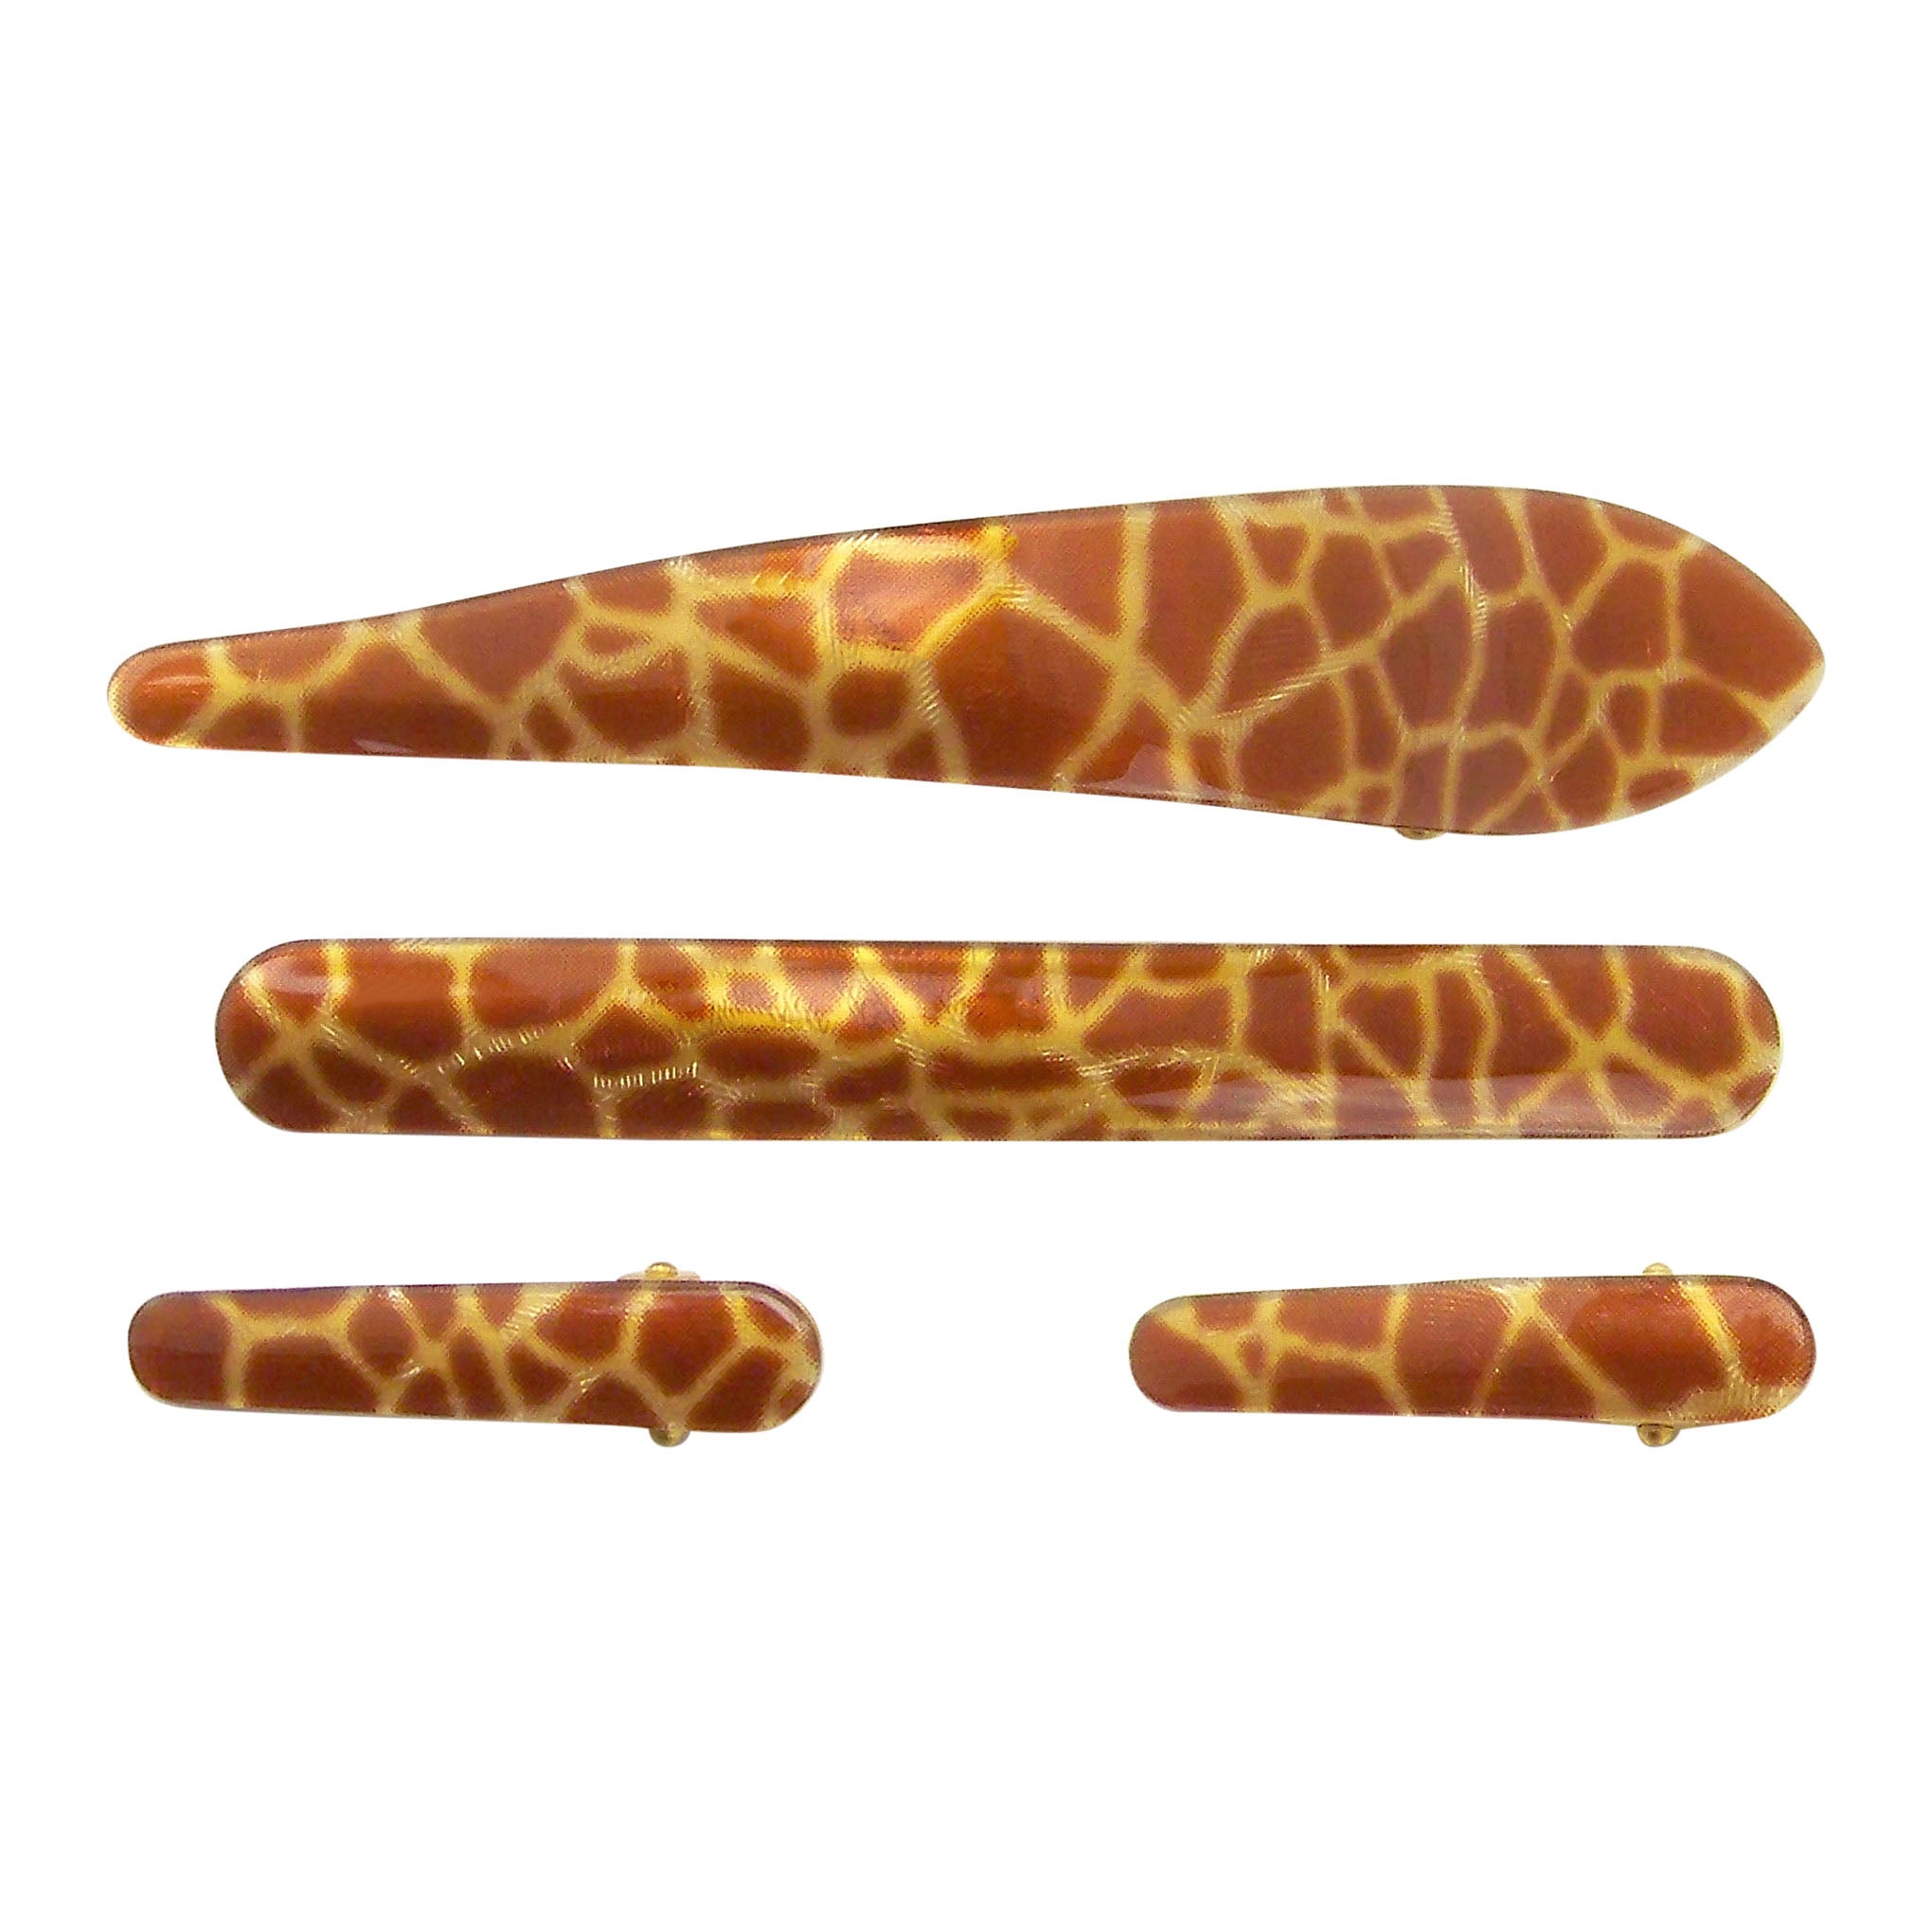 Ficcare Ficcarissimo Hair Clip in Giraffe Acetate and Gold Plated